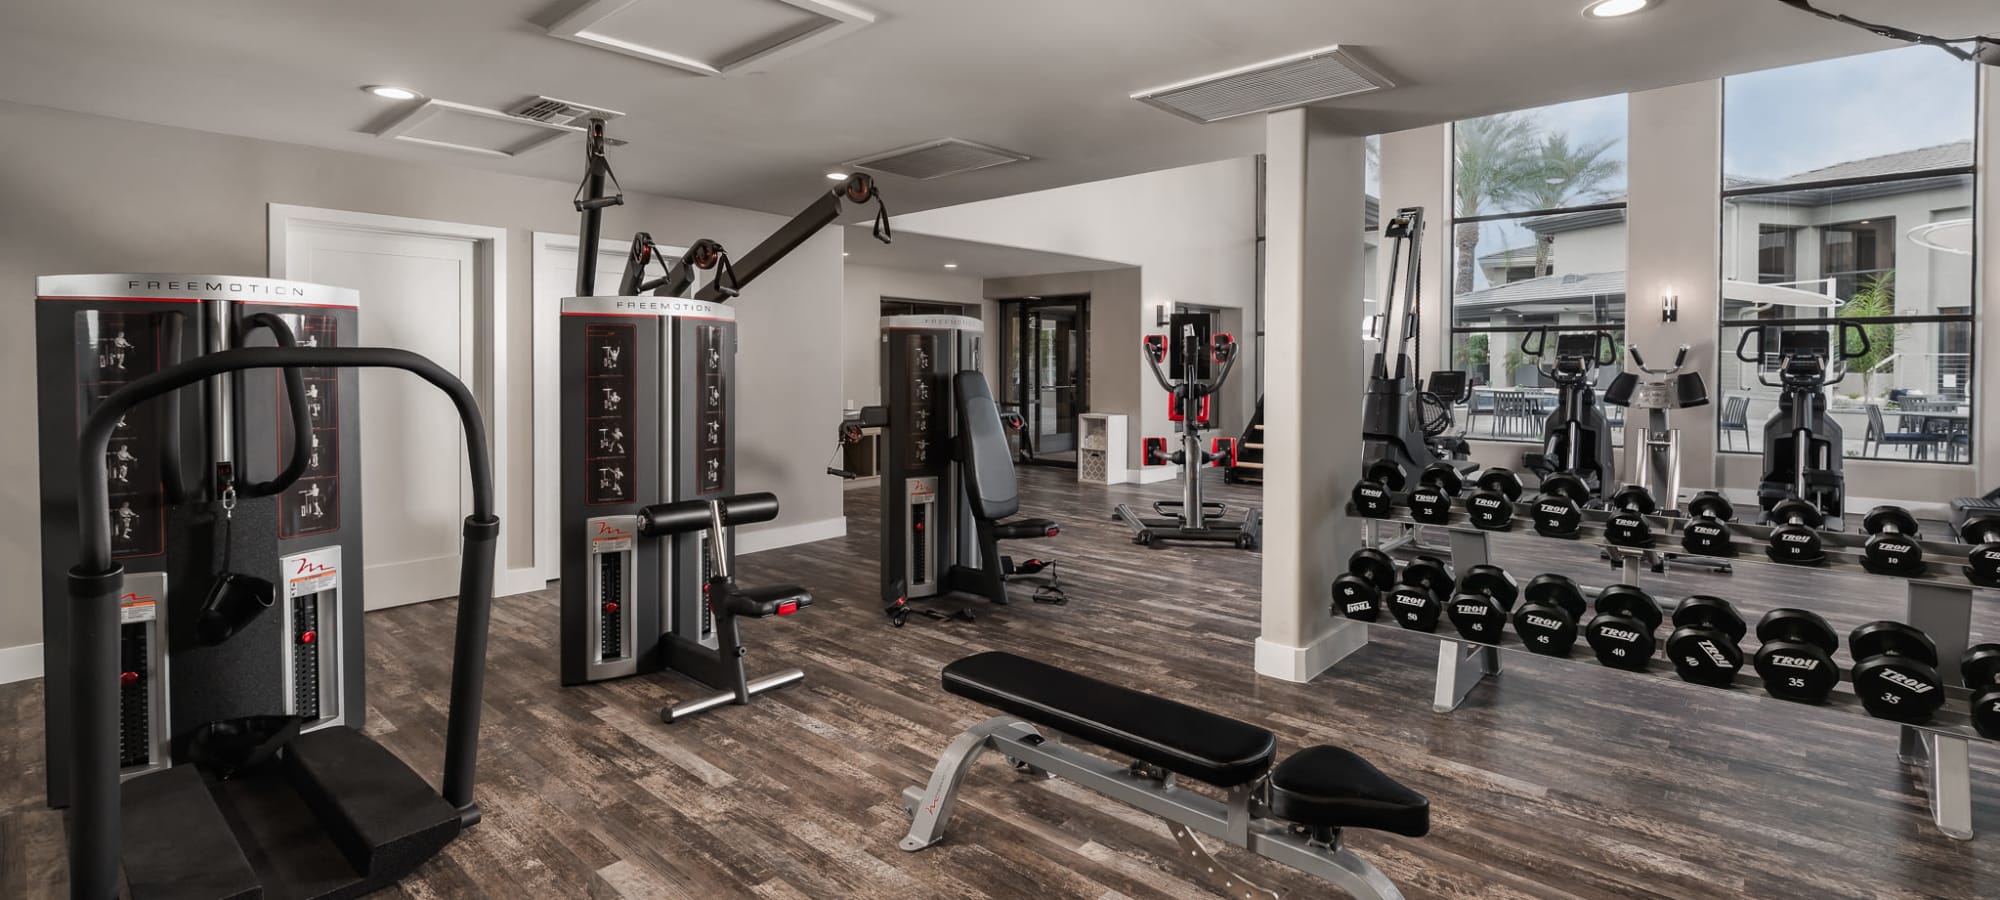 Full fitness area where you can get a tough workout in before work at Elite North Scottsdale in Scottsdale, Arizona